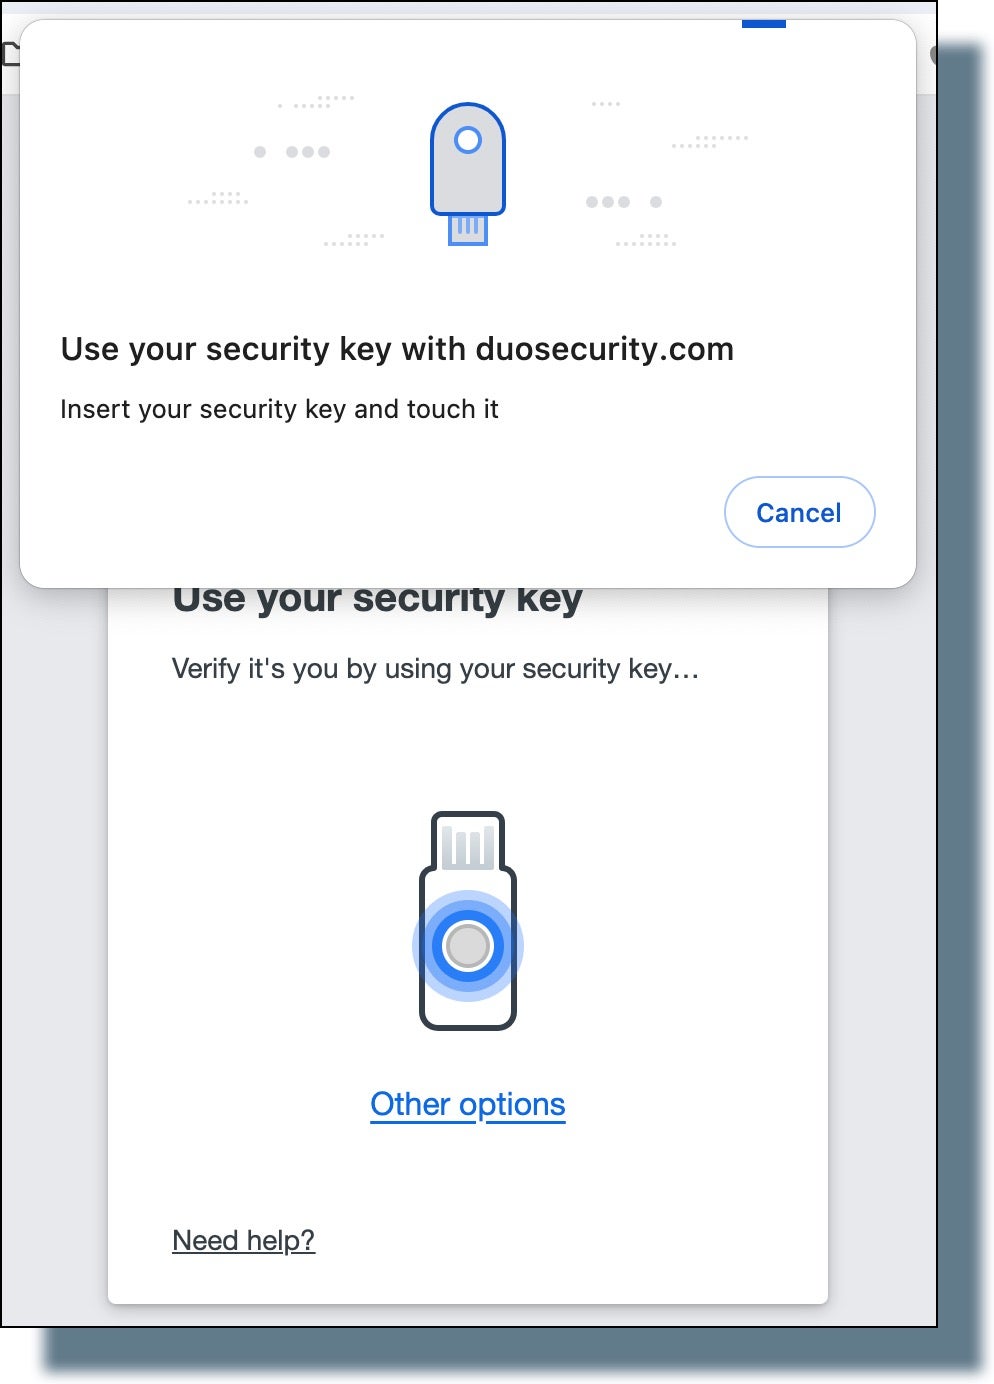 Duo screens prompting you to authenticate with your security key. Insert your key, then touch either metal sensors or a 'Y' enclosed circle.